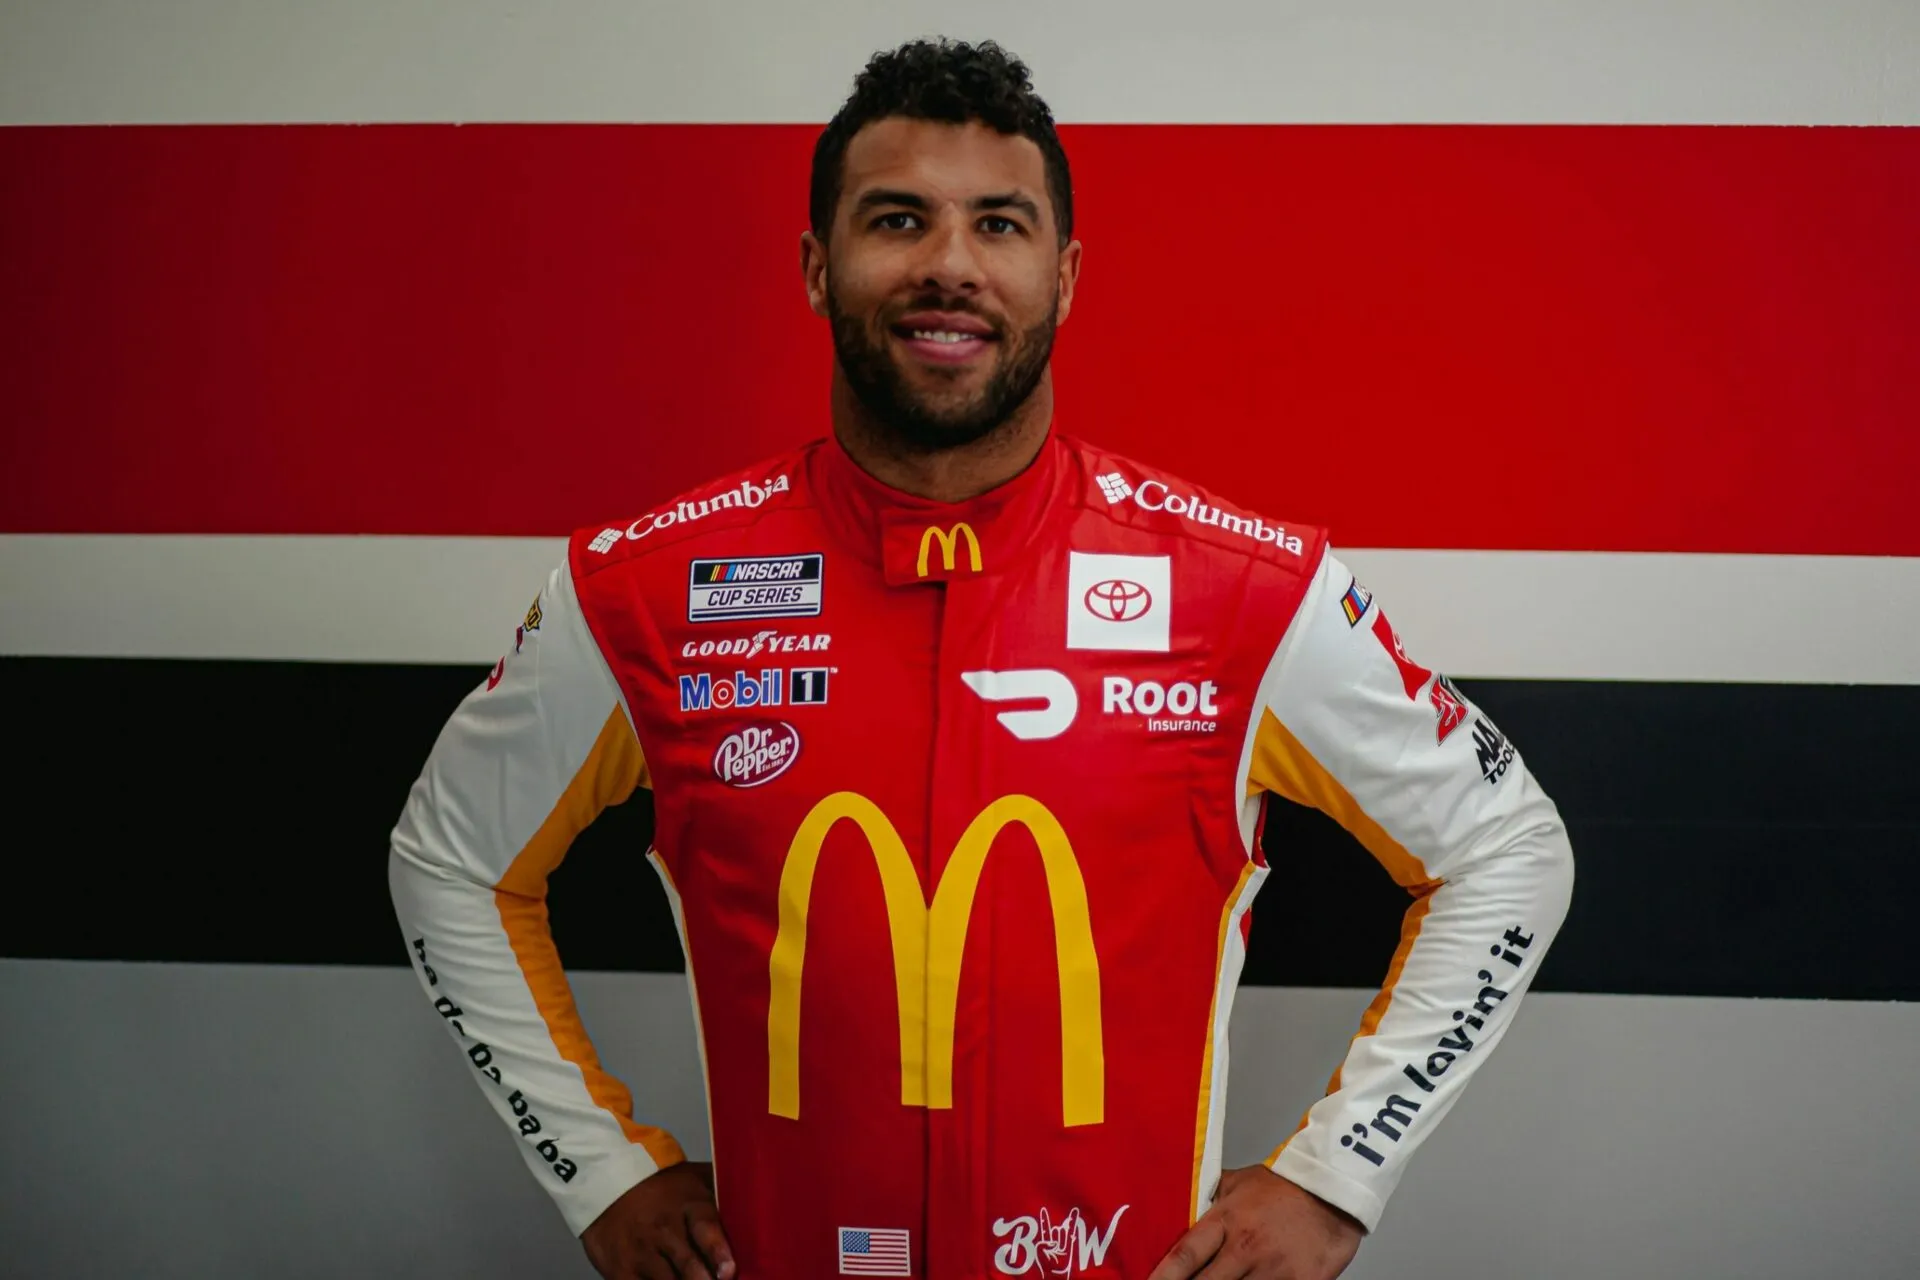 A man in red and white racing suit standing next to a wall.